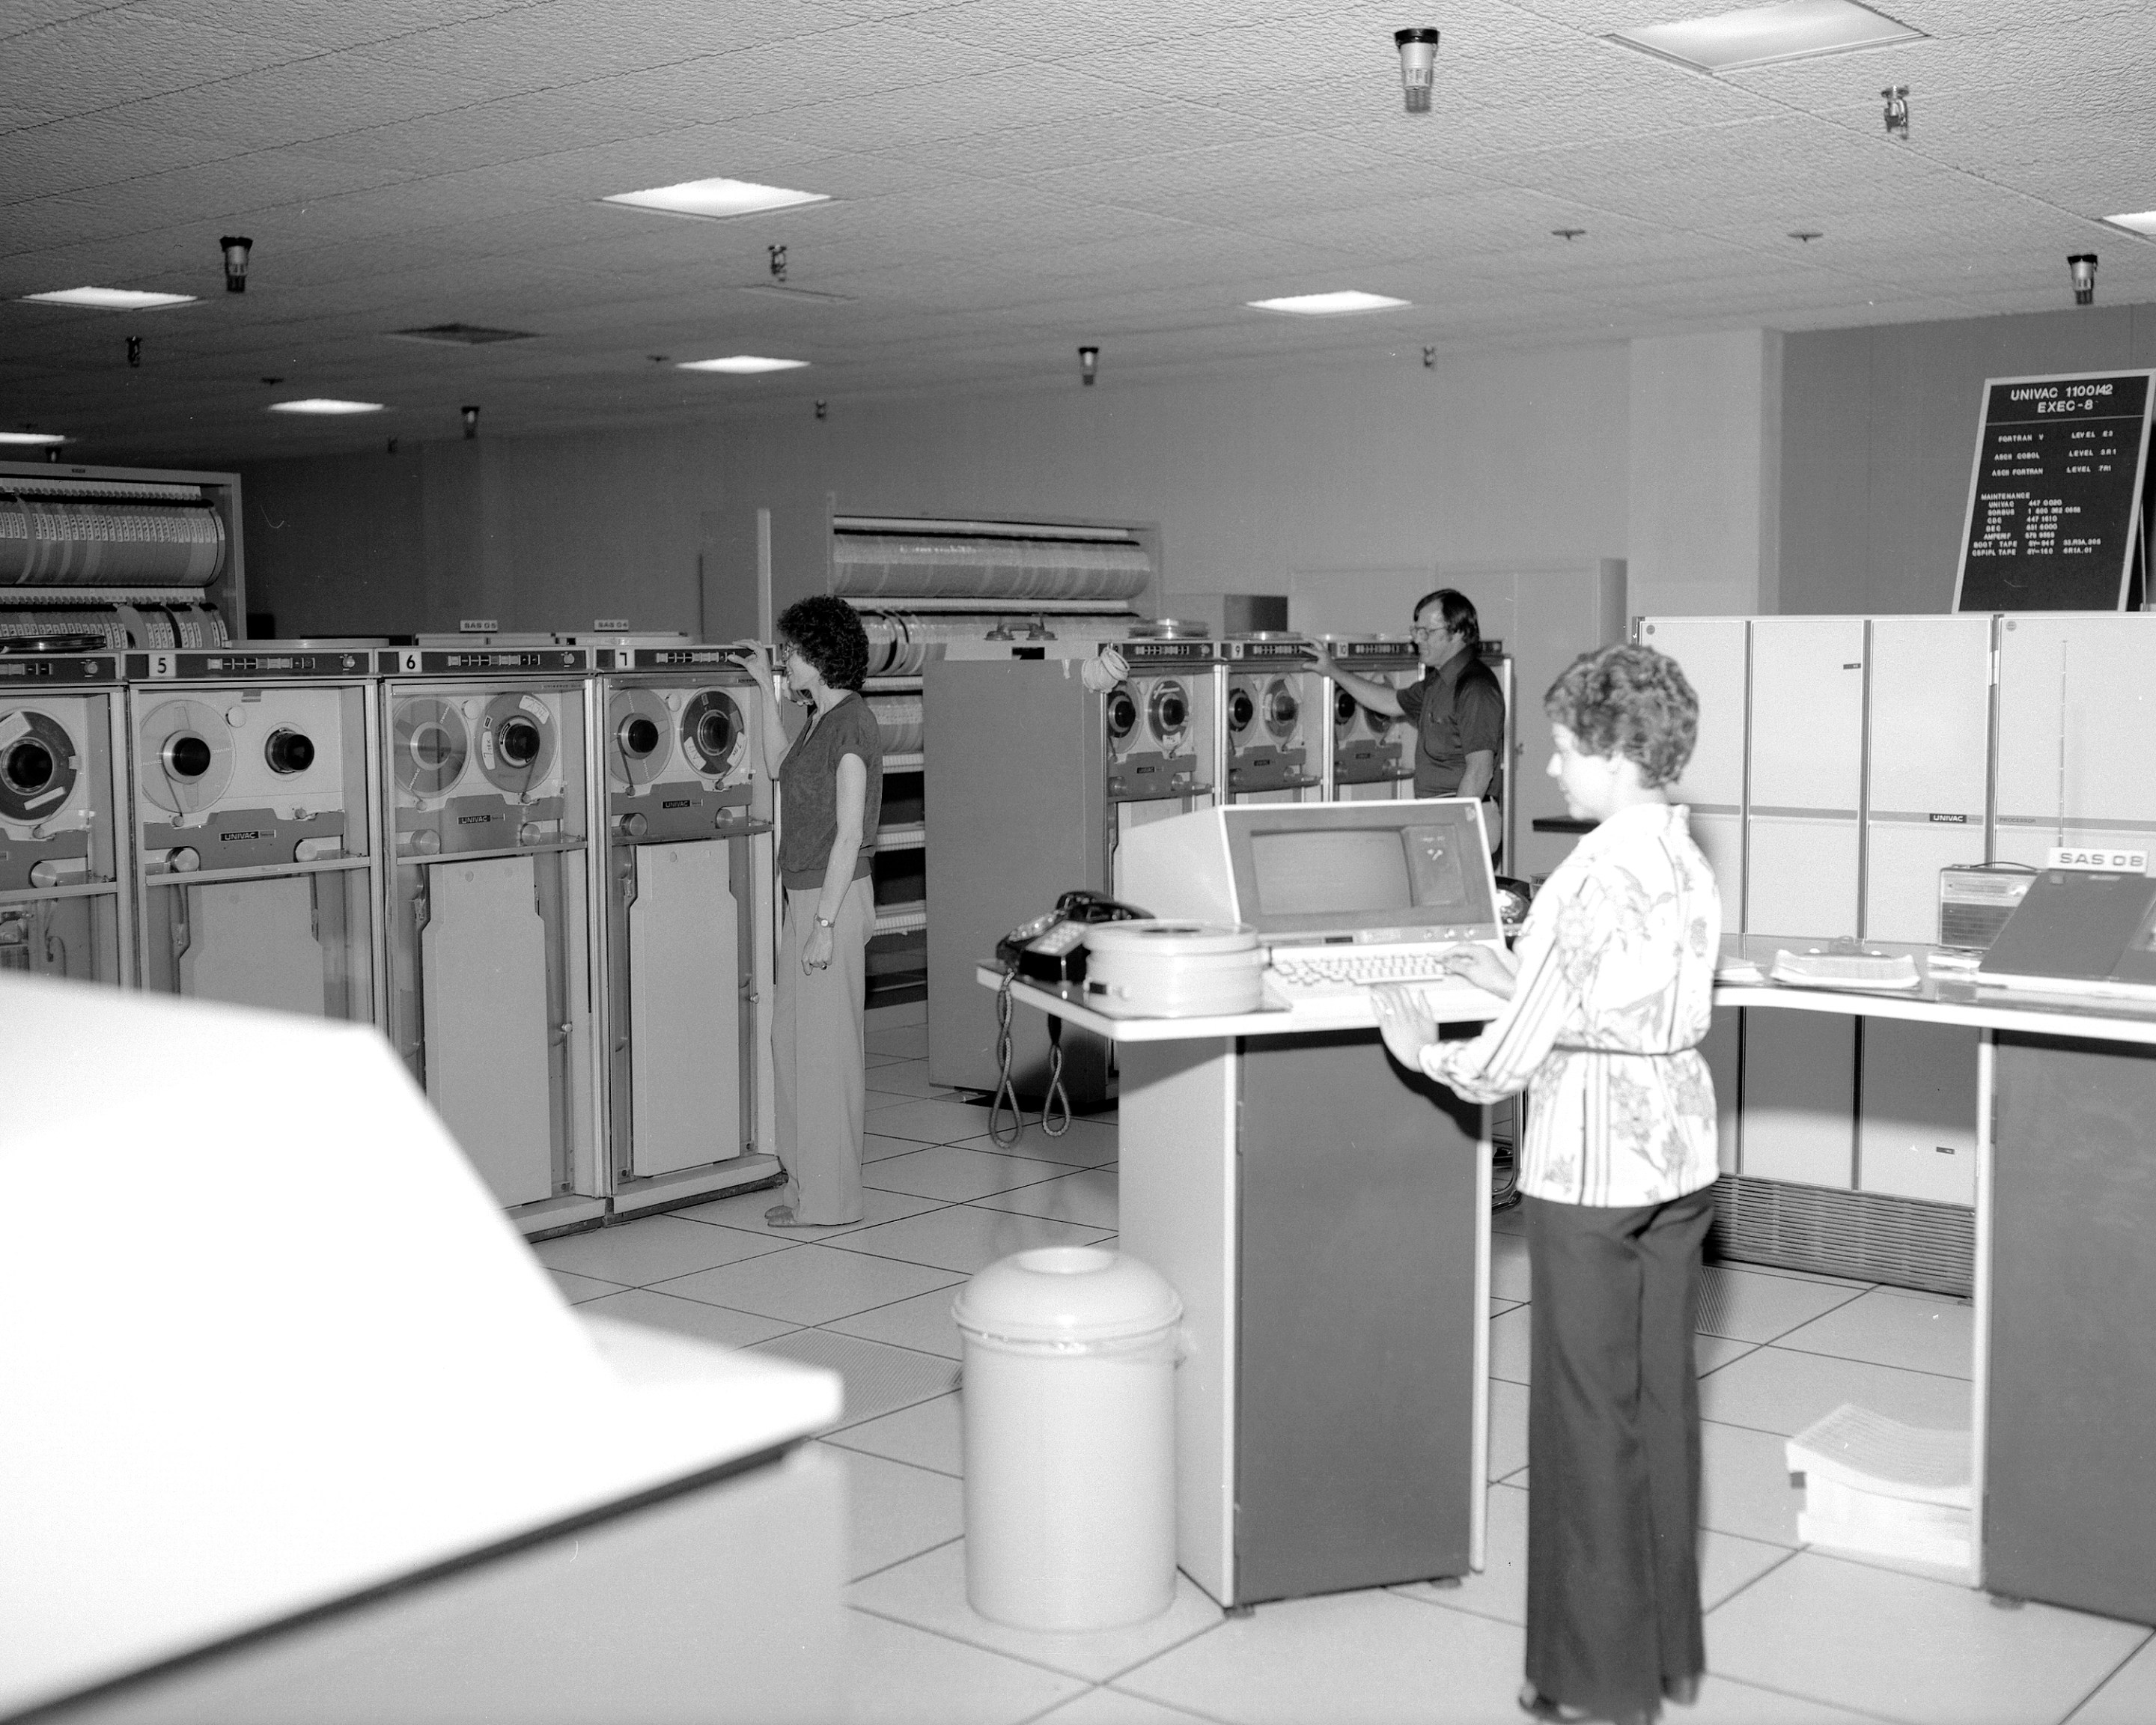 Computer room and workers ca. 1980. (Photo by: HUM Images/Universal Images Group via Getty Images)